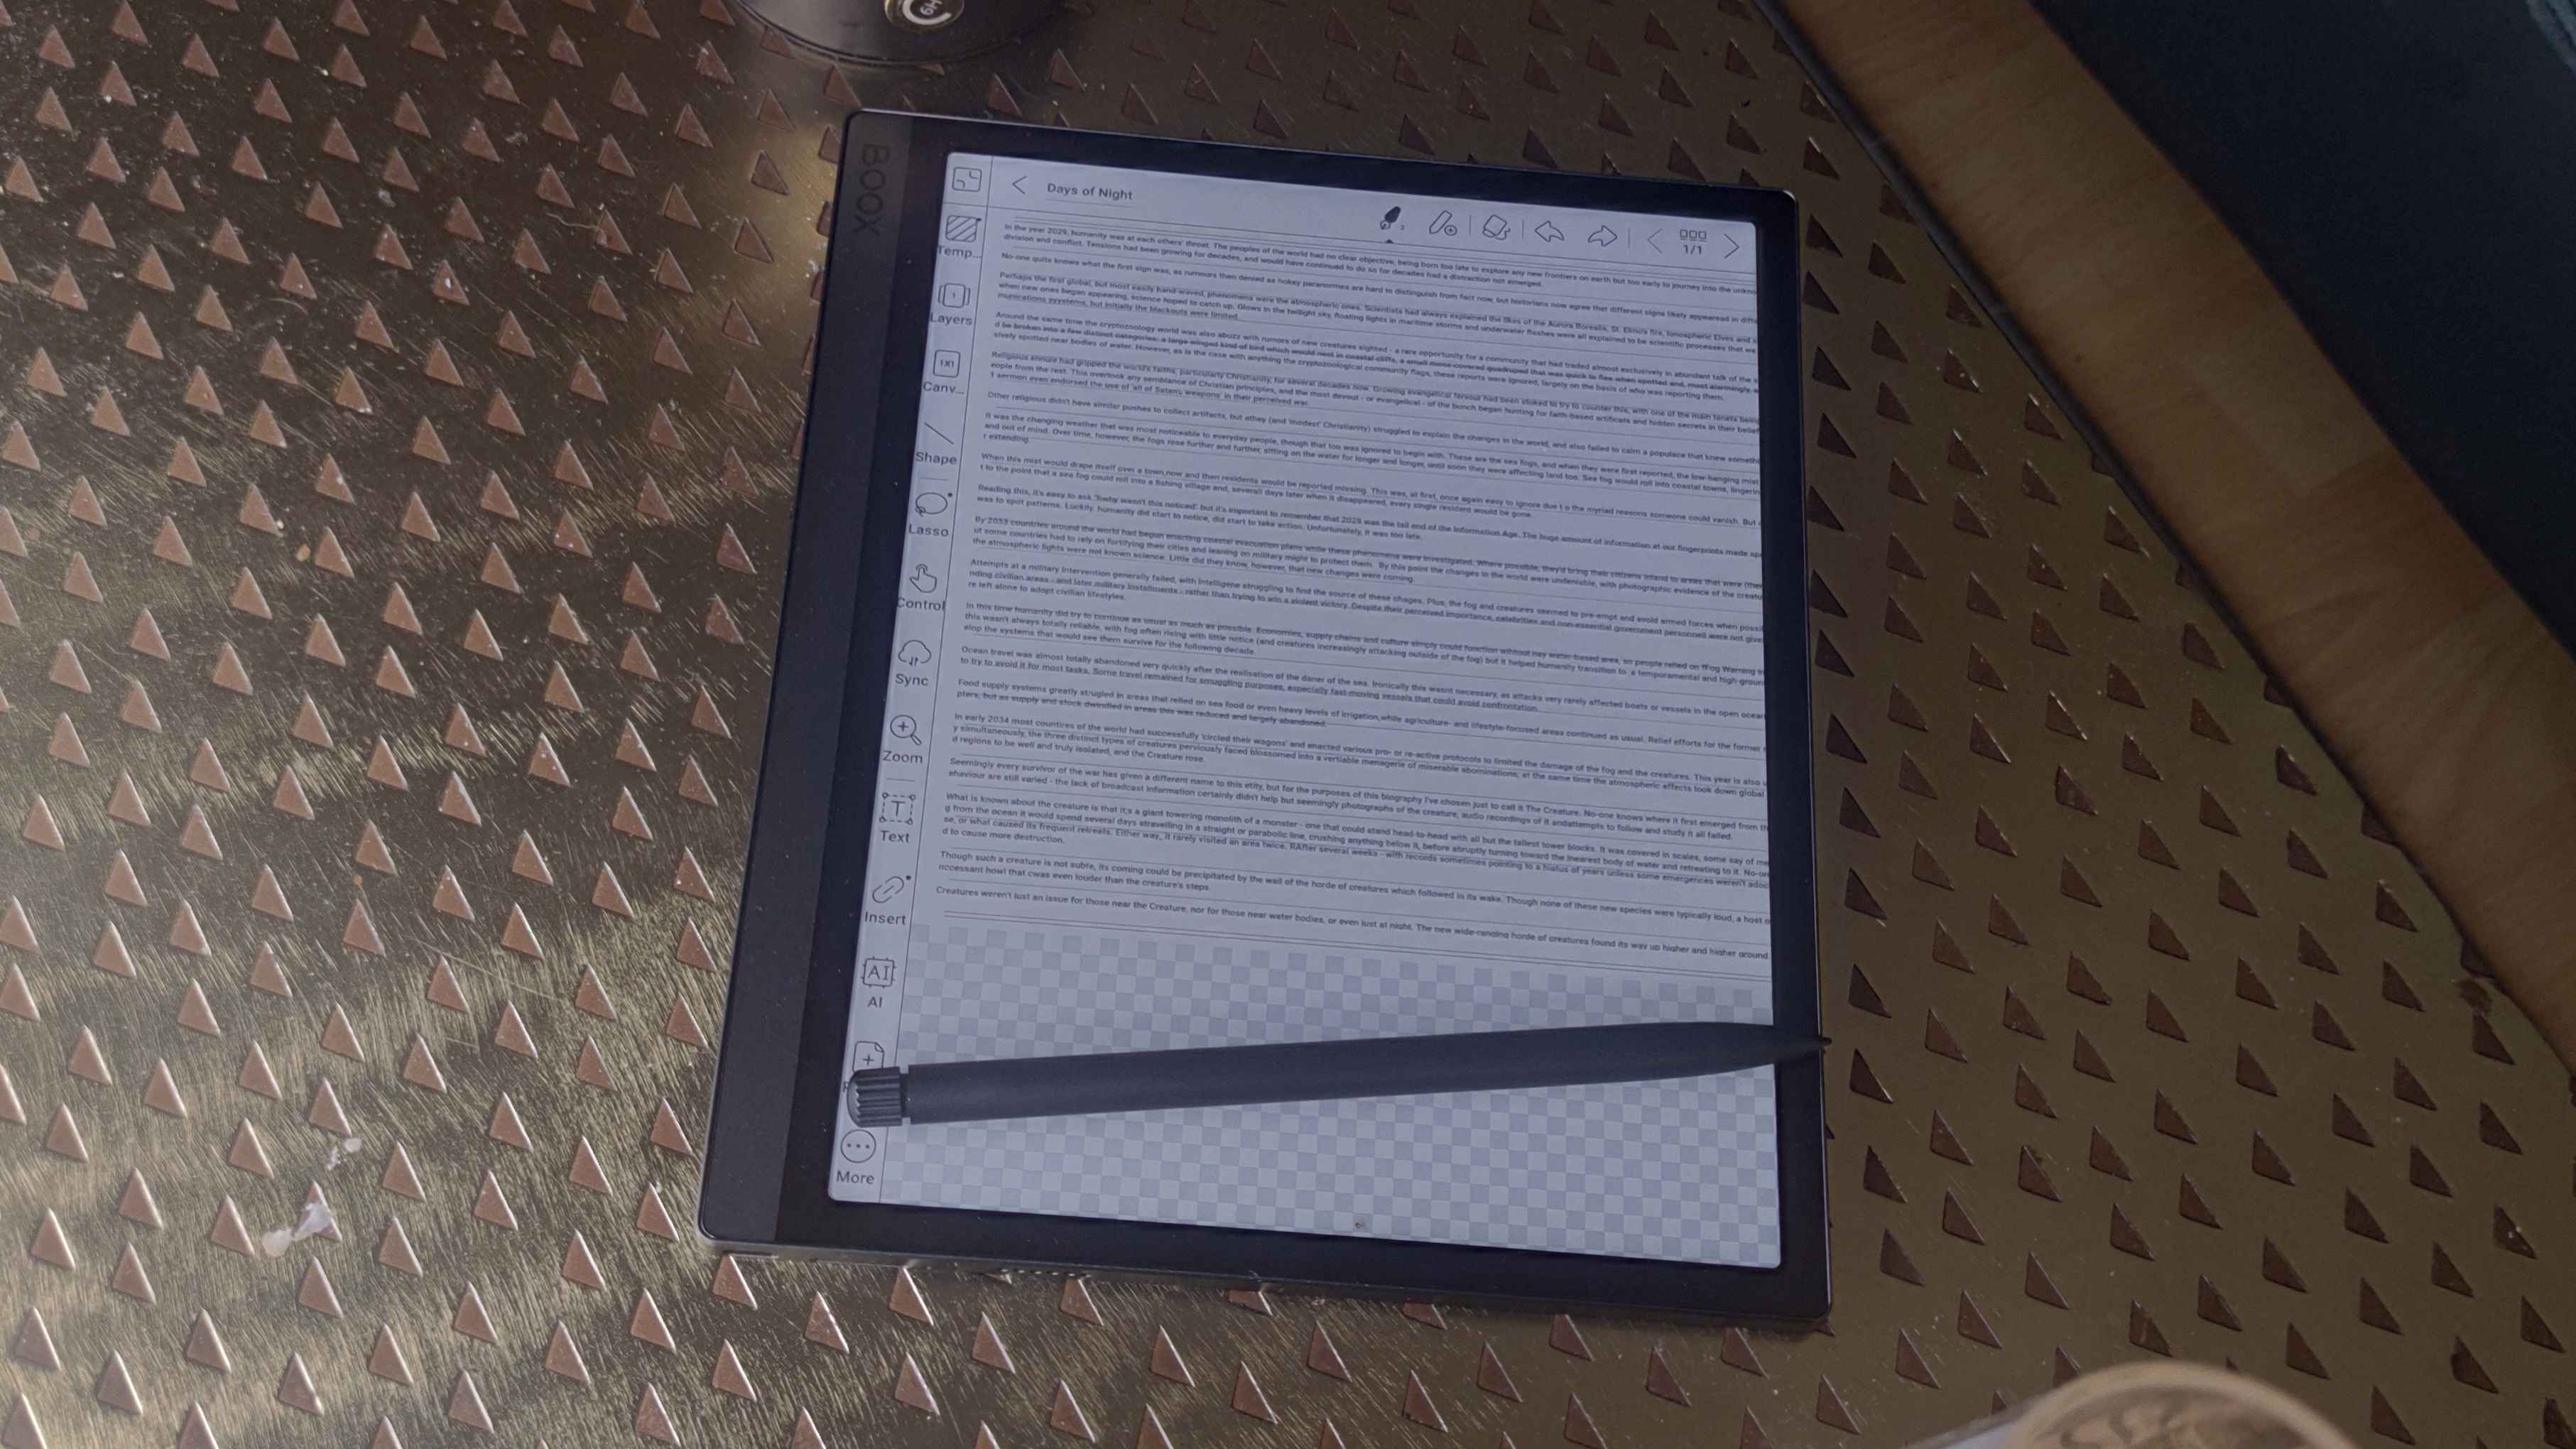 A word processed document on the screen of the ONYX BOOX Tab Ultra C